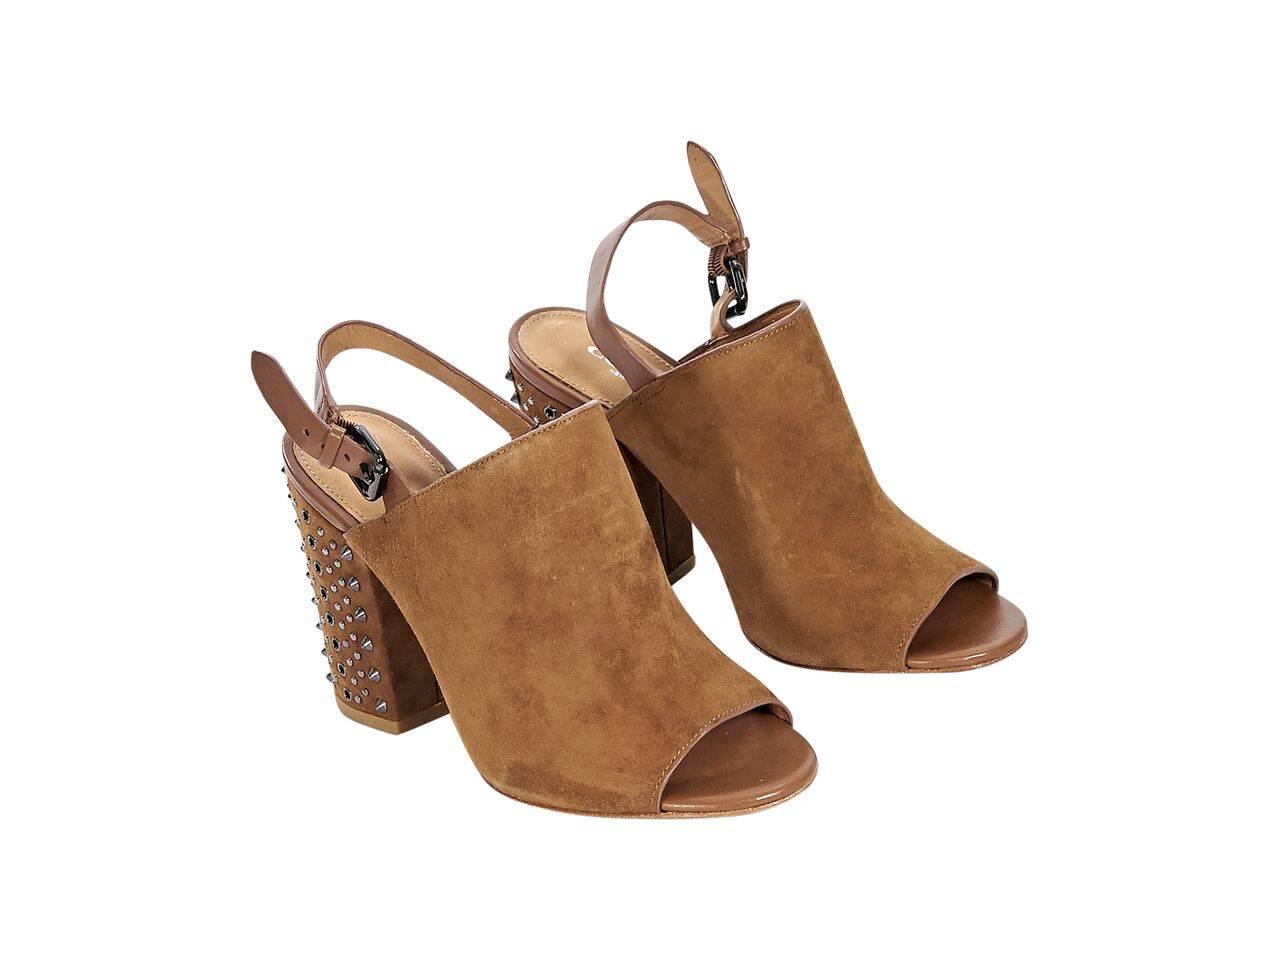 Product details:  Tan suede slingback mules by Coach.  Adjustable slingback strap.  Open toe.  Studded block heel.  Gunmetal-tone hardware.
Condition: Pre-owned. Very good.
Est. Retail $ 498.00